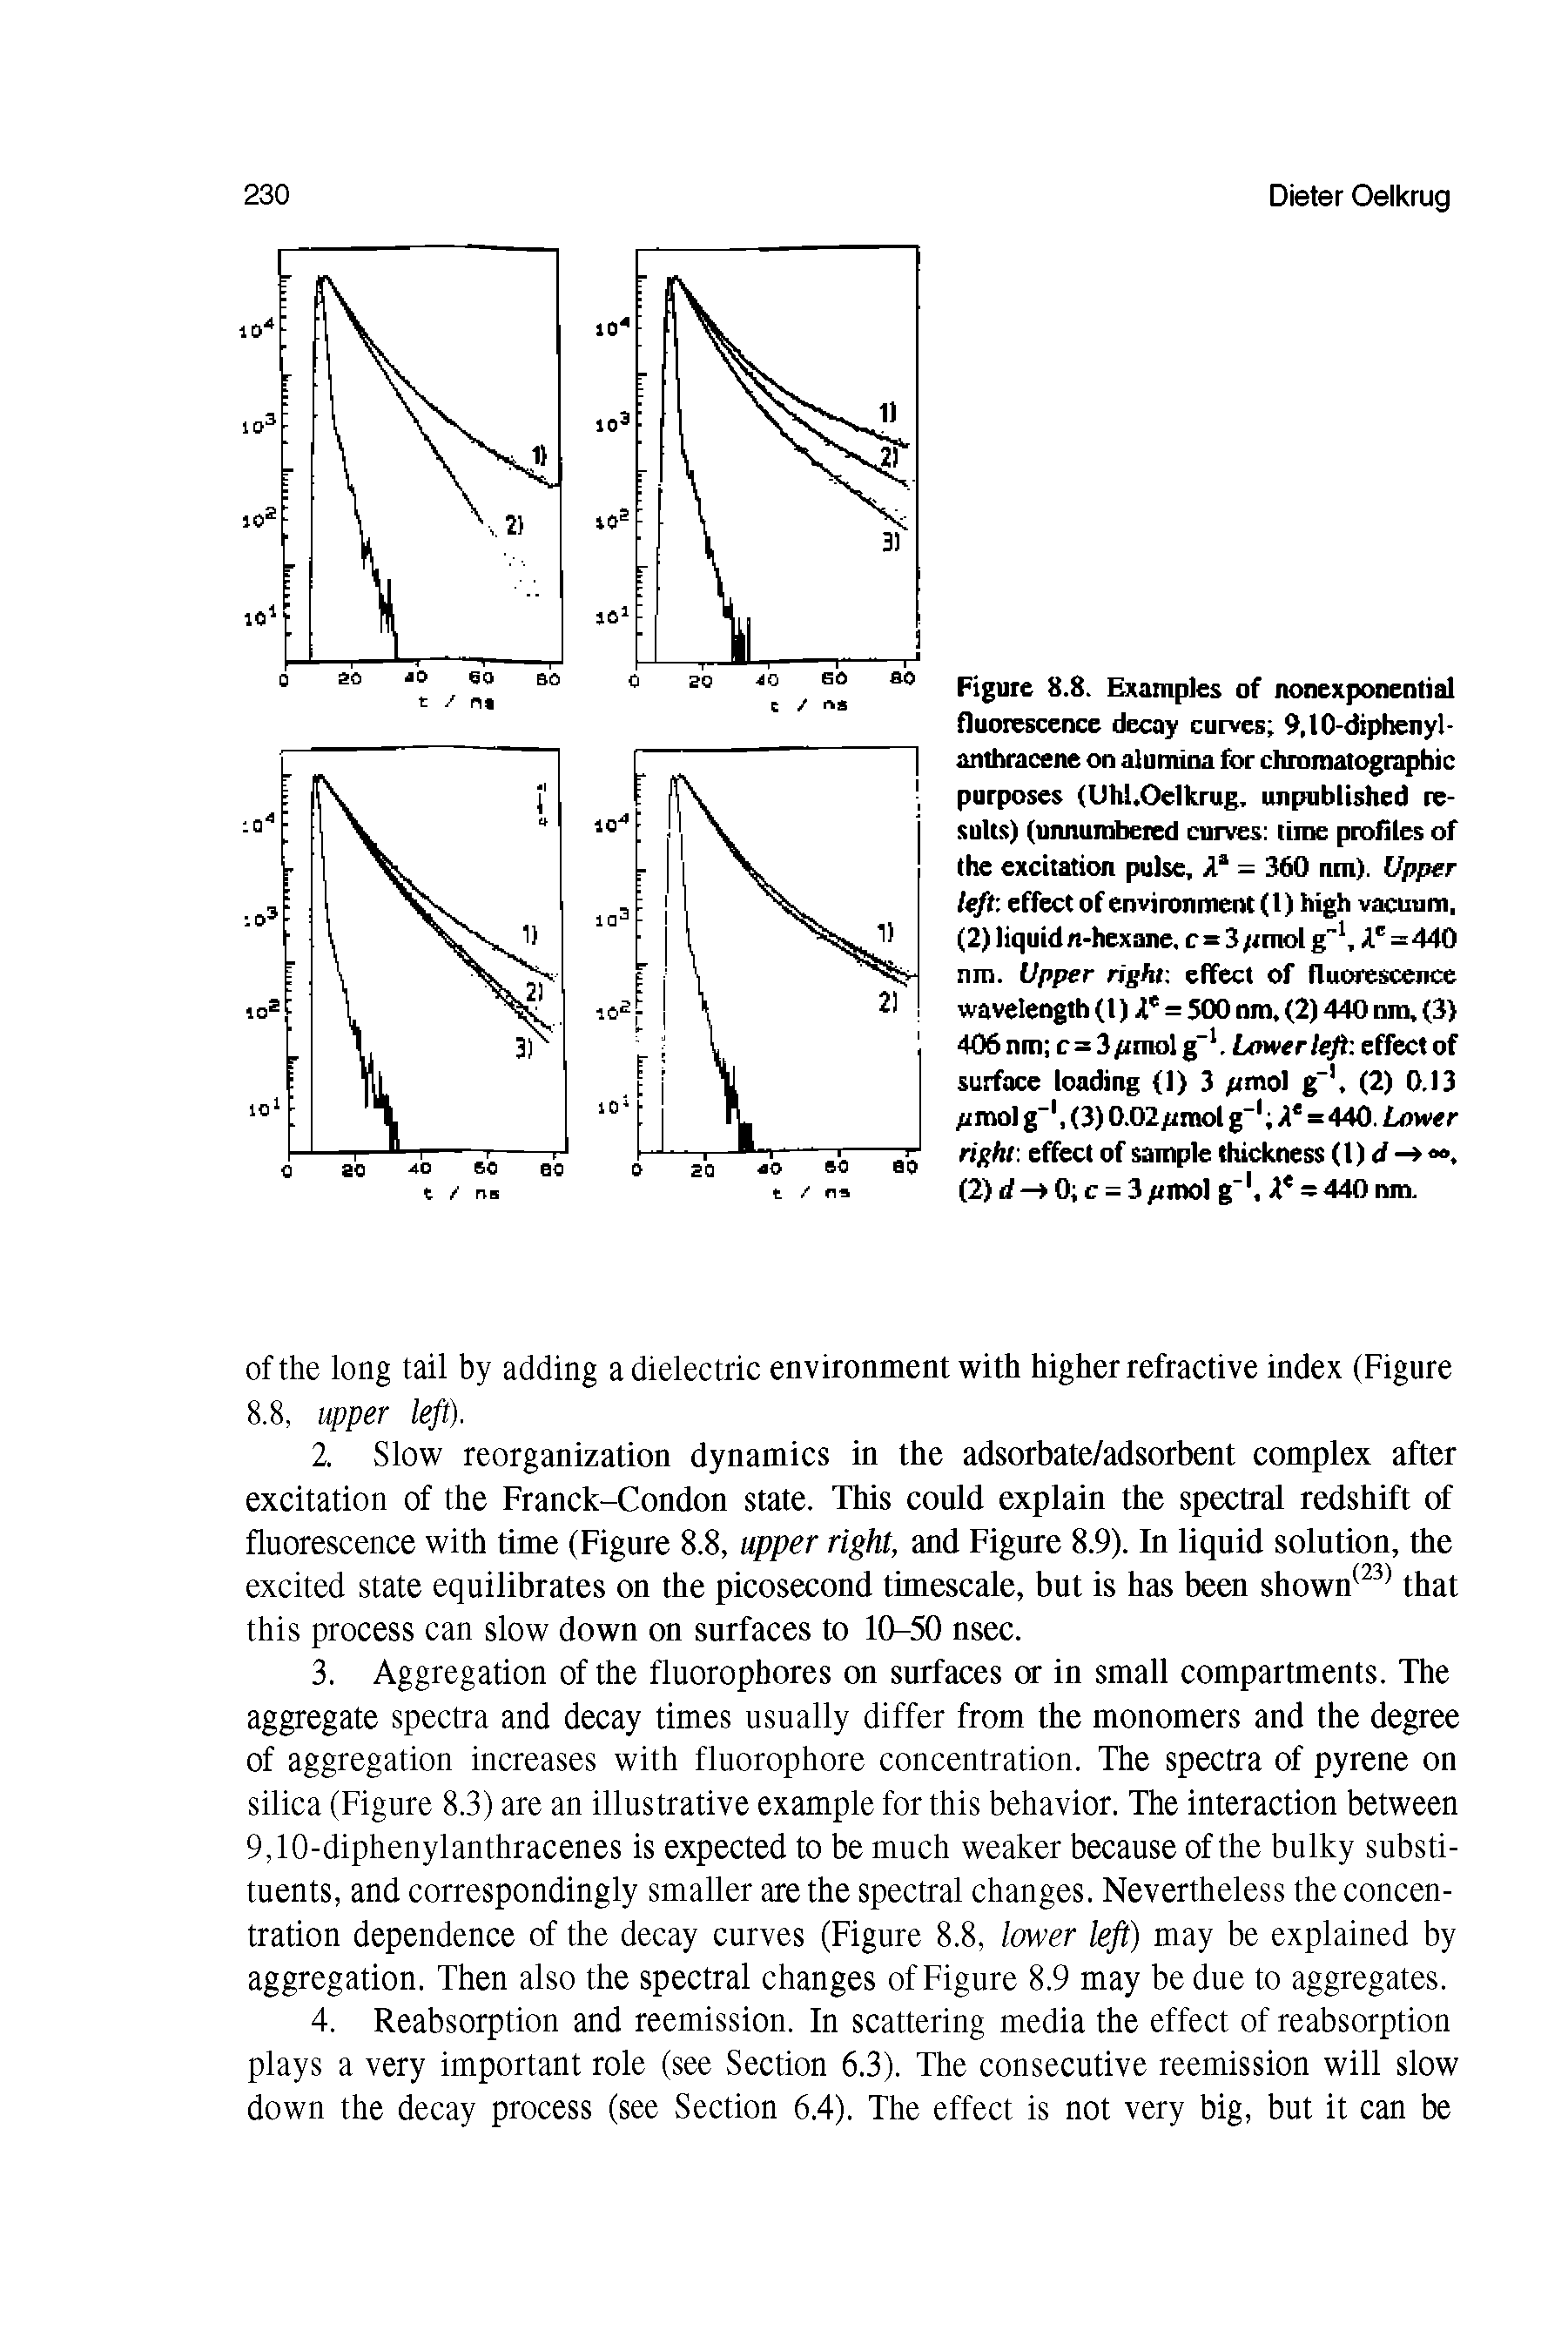 Figure 8.8. Examples of nonexponential fluorescence decay curves 9,10-diphenyl-anthracene on alumina for chromatographic purposes (Uhl.Oelkrug, unpublished results) (unnumbered curves time profiles of the excitation pulse, 2 - 360 nm). Upper left effect of environment (1) high vacuum, (2) liquid n-hexane. c=3/tmol g"1,2 =440 nm. Upper right effect of fluorescence wavelength (1) 2 = 500 nm, (2) 440 nm, (3) 406 nm c=3 /tmol g 1. Lower left effect of surface loading (1) 3 /rmol g (2) 0.13 mol g , (3) 0.02/r mol g"1 2e=440. Lower right effect of sample thickness (l) d - . (2) d - 0 c - 3 /tmol g 1, 2 = 440 nm.